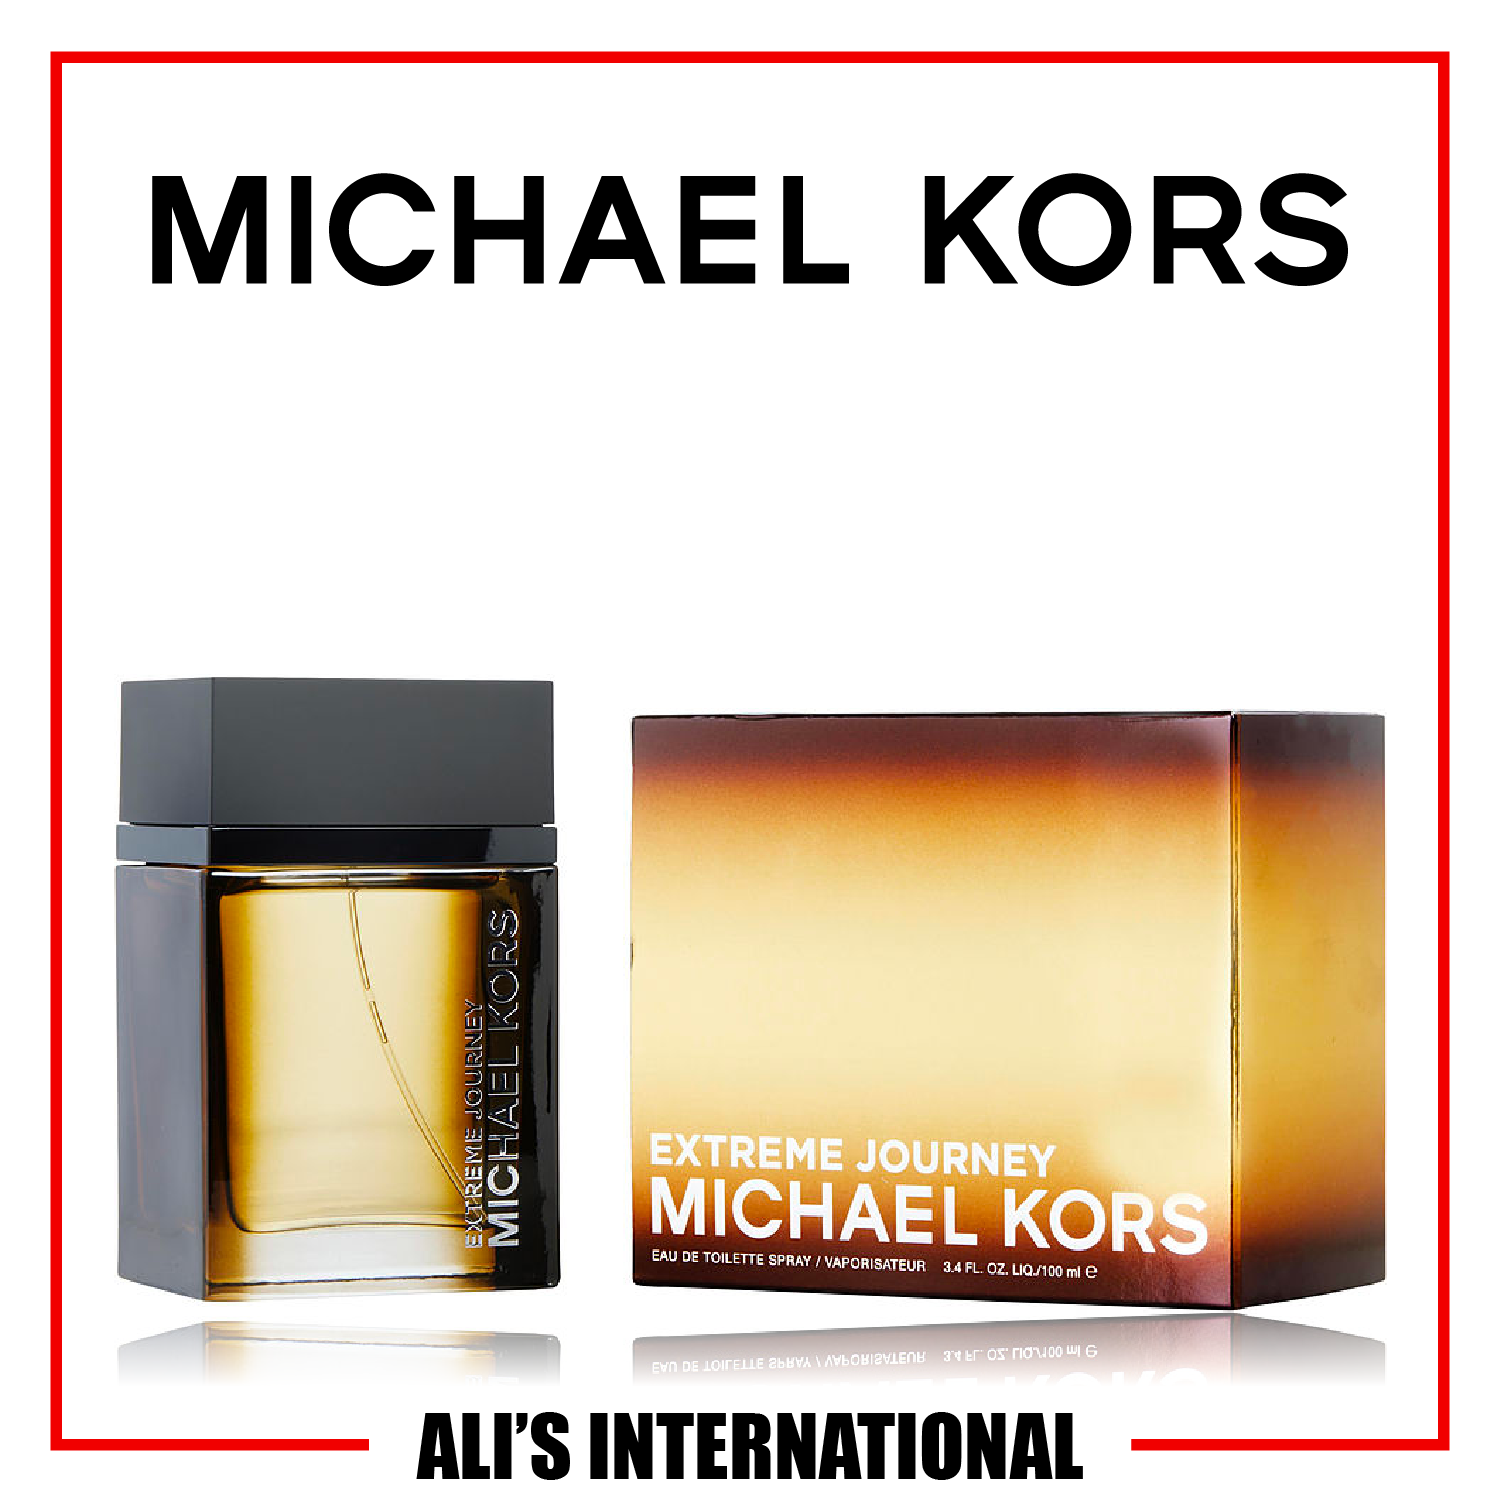 Extreme Journey by Michael Kors